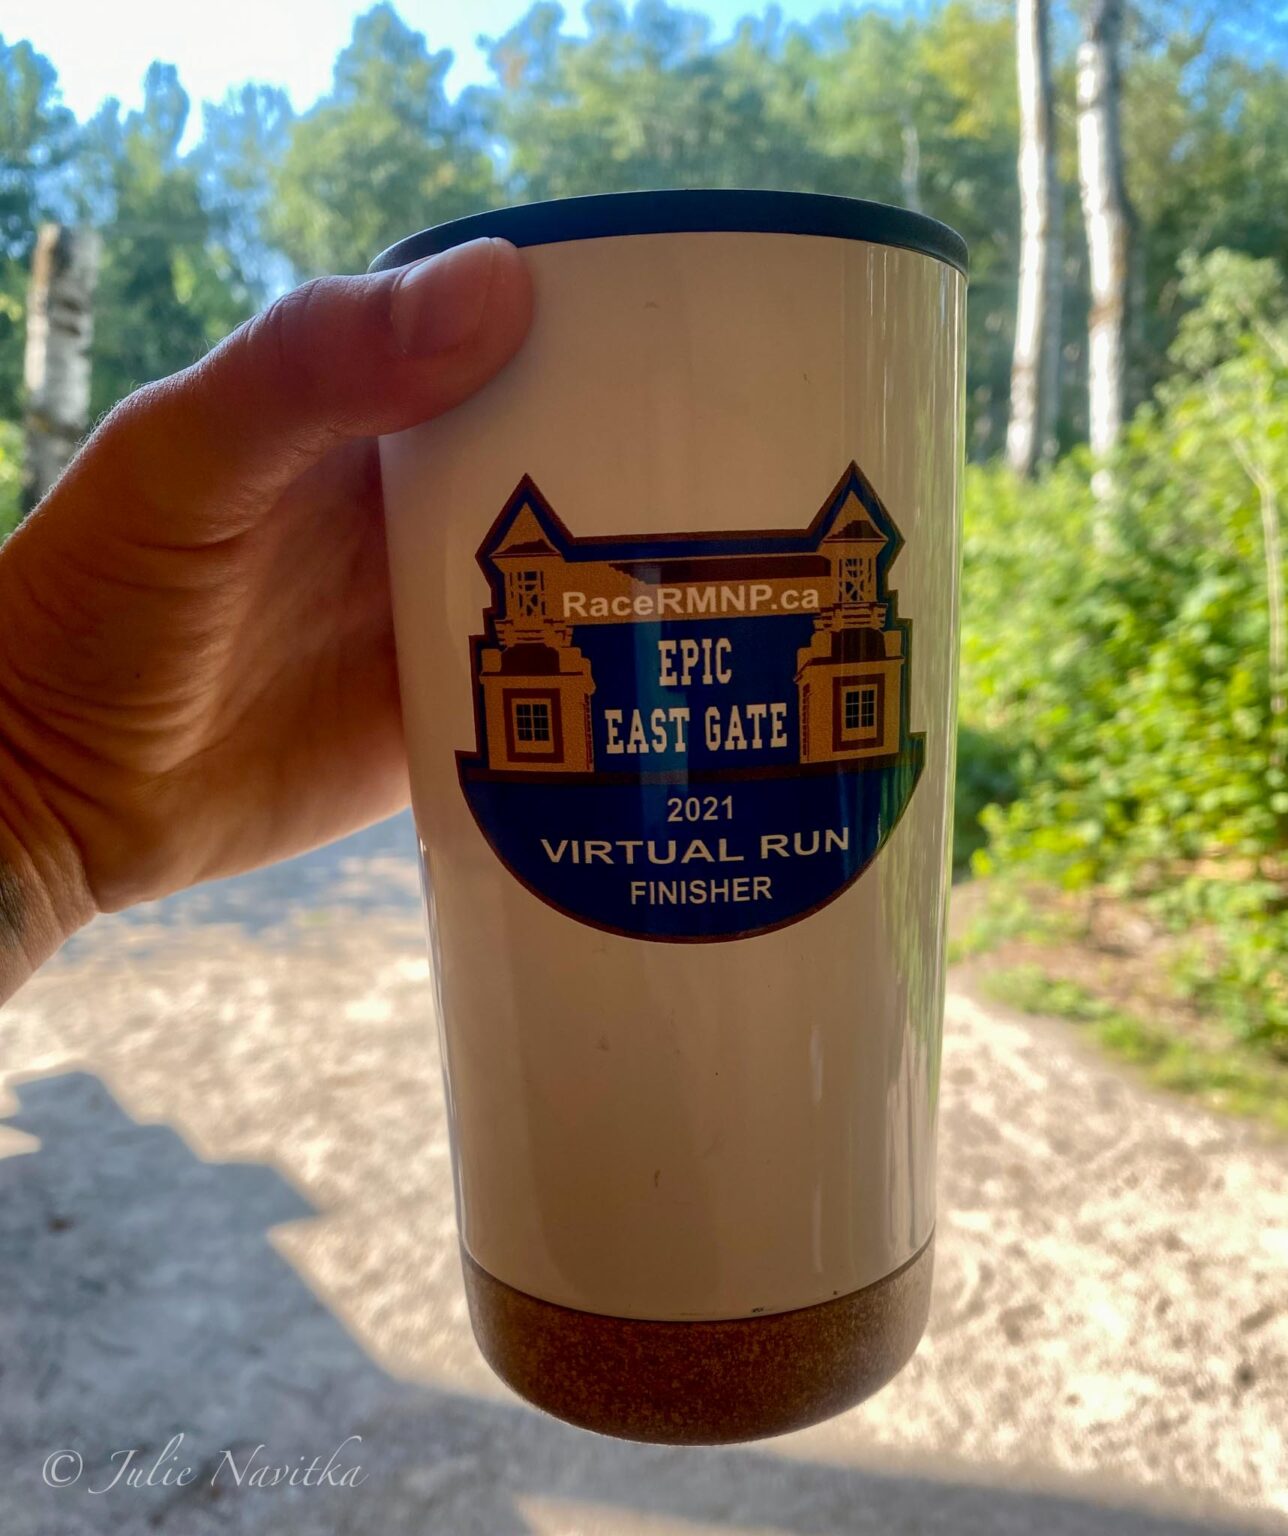 Up-close image of travel coffee mug with forested background. Re-usable beverage containers are a must when it comes to recreating sustainably.